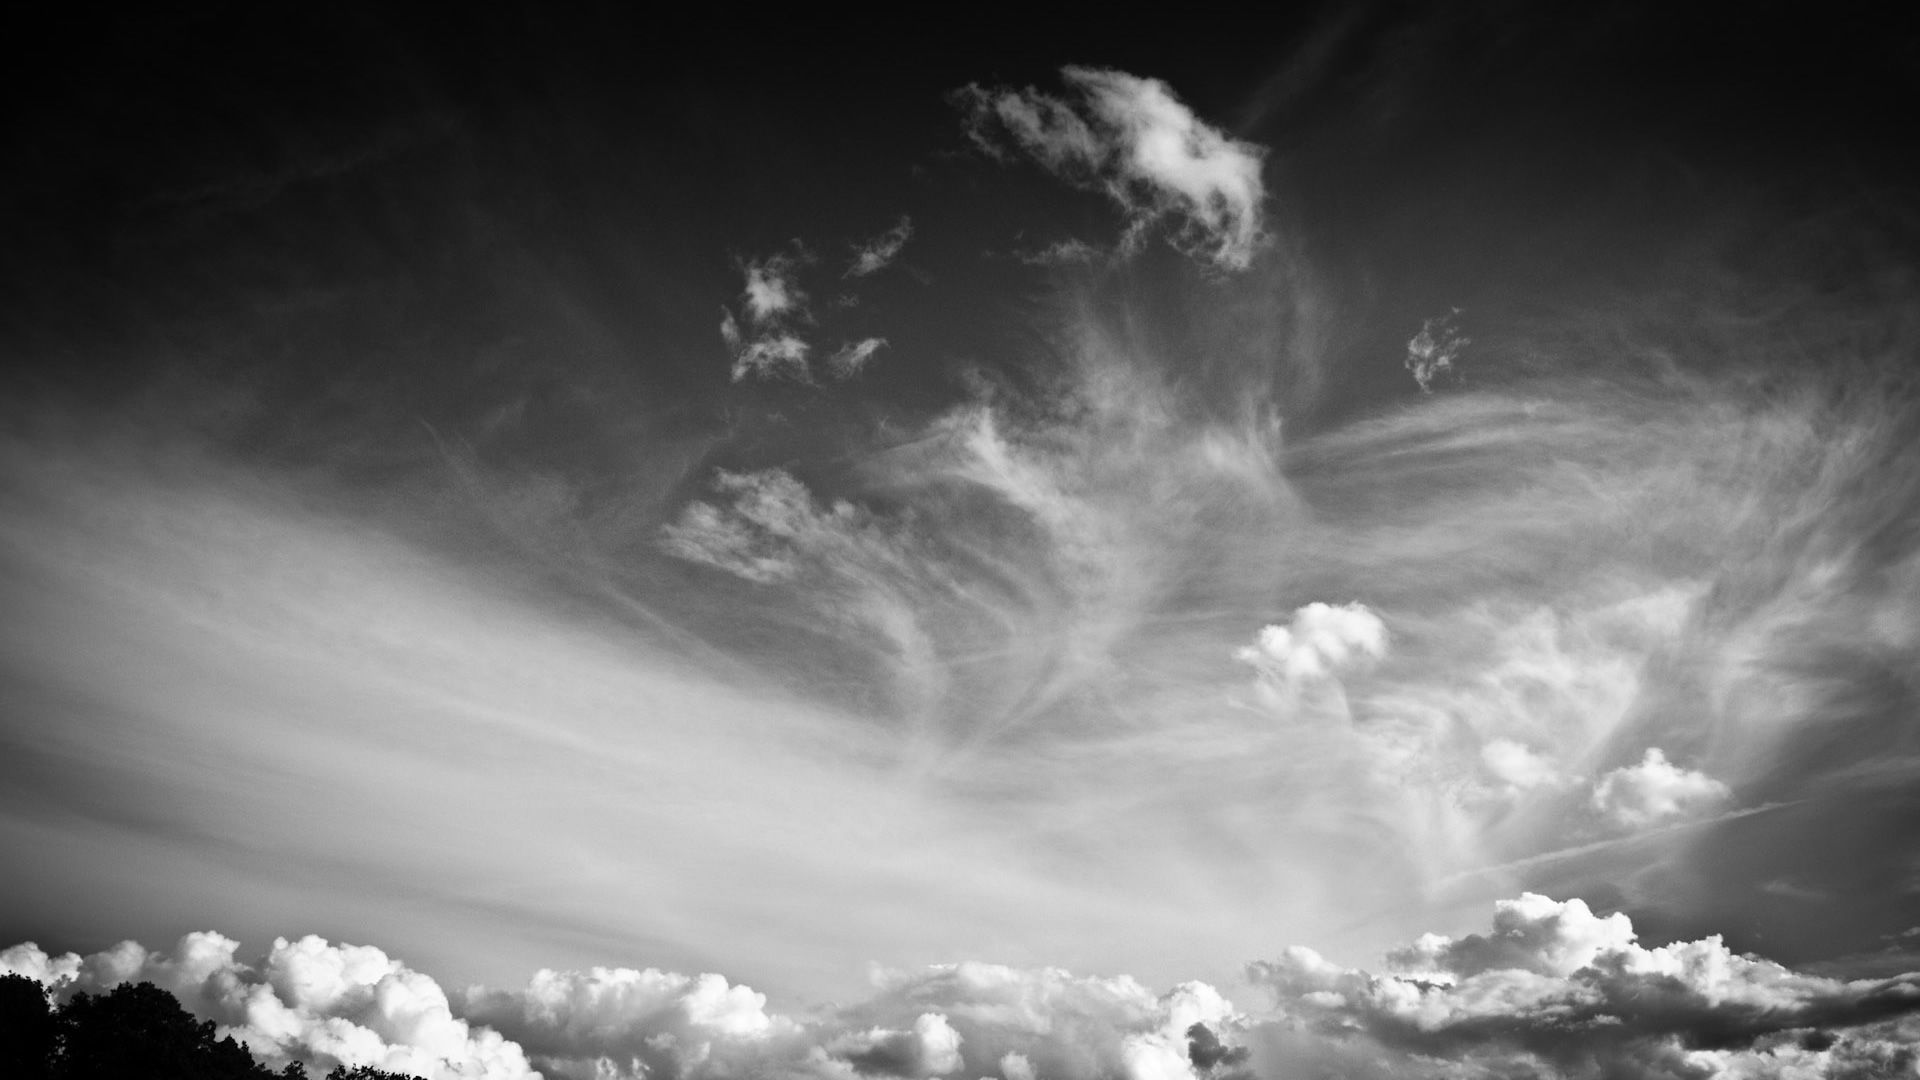 Artistic Clouds – Black and White HD Wallpaper @ 1080p HD Wallpapers